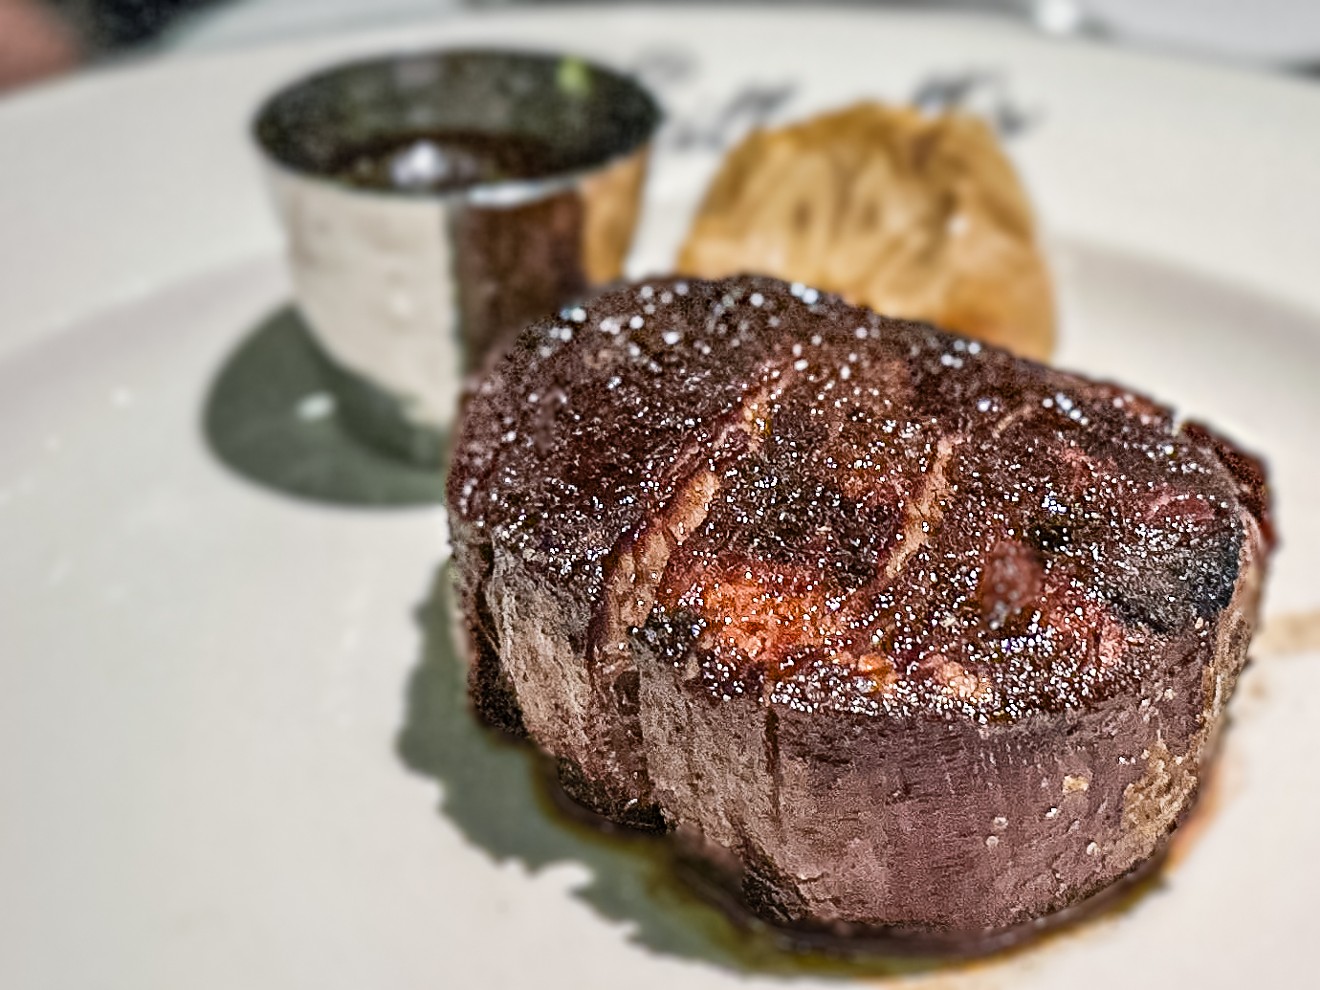 A locally sourced aged  HWD Akaushi beef 12-ounce filet mignon was one of the highlights of the meal at Stillwell's at the Hôtel Swexan.